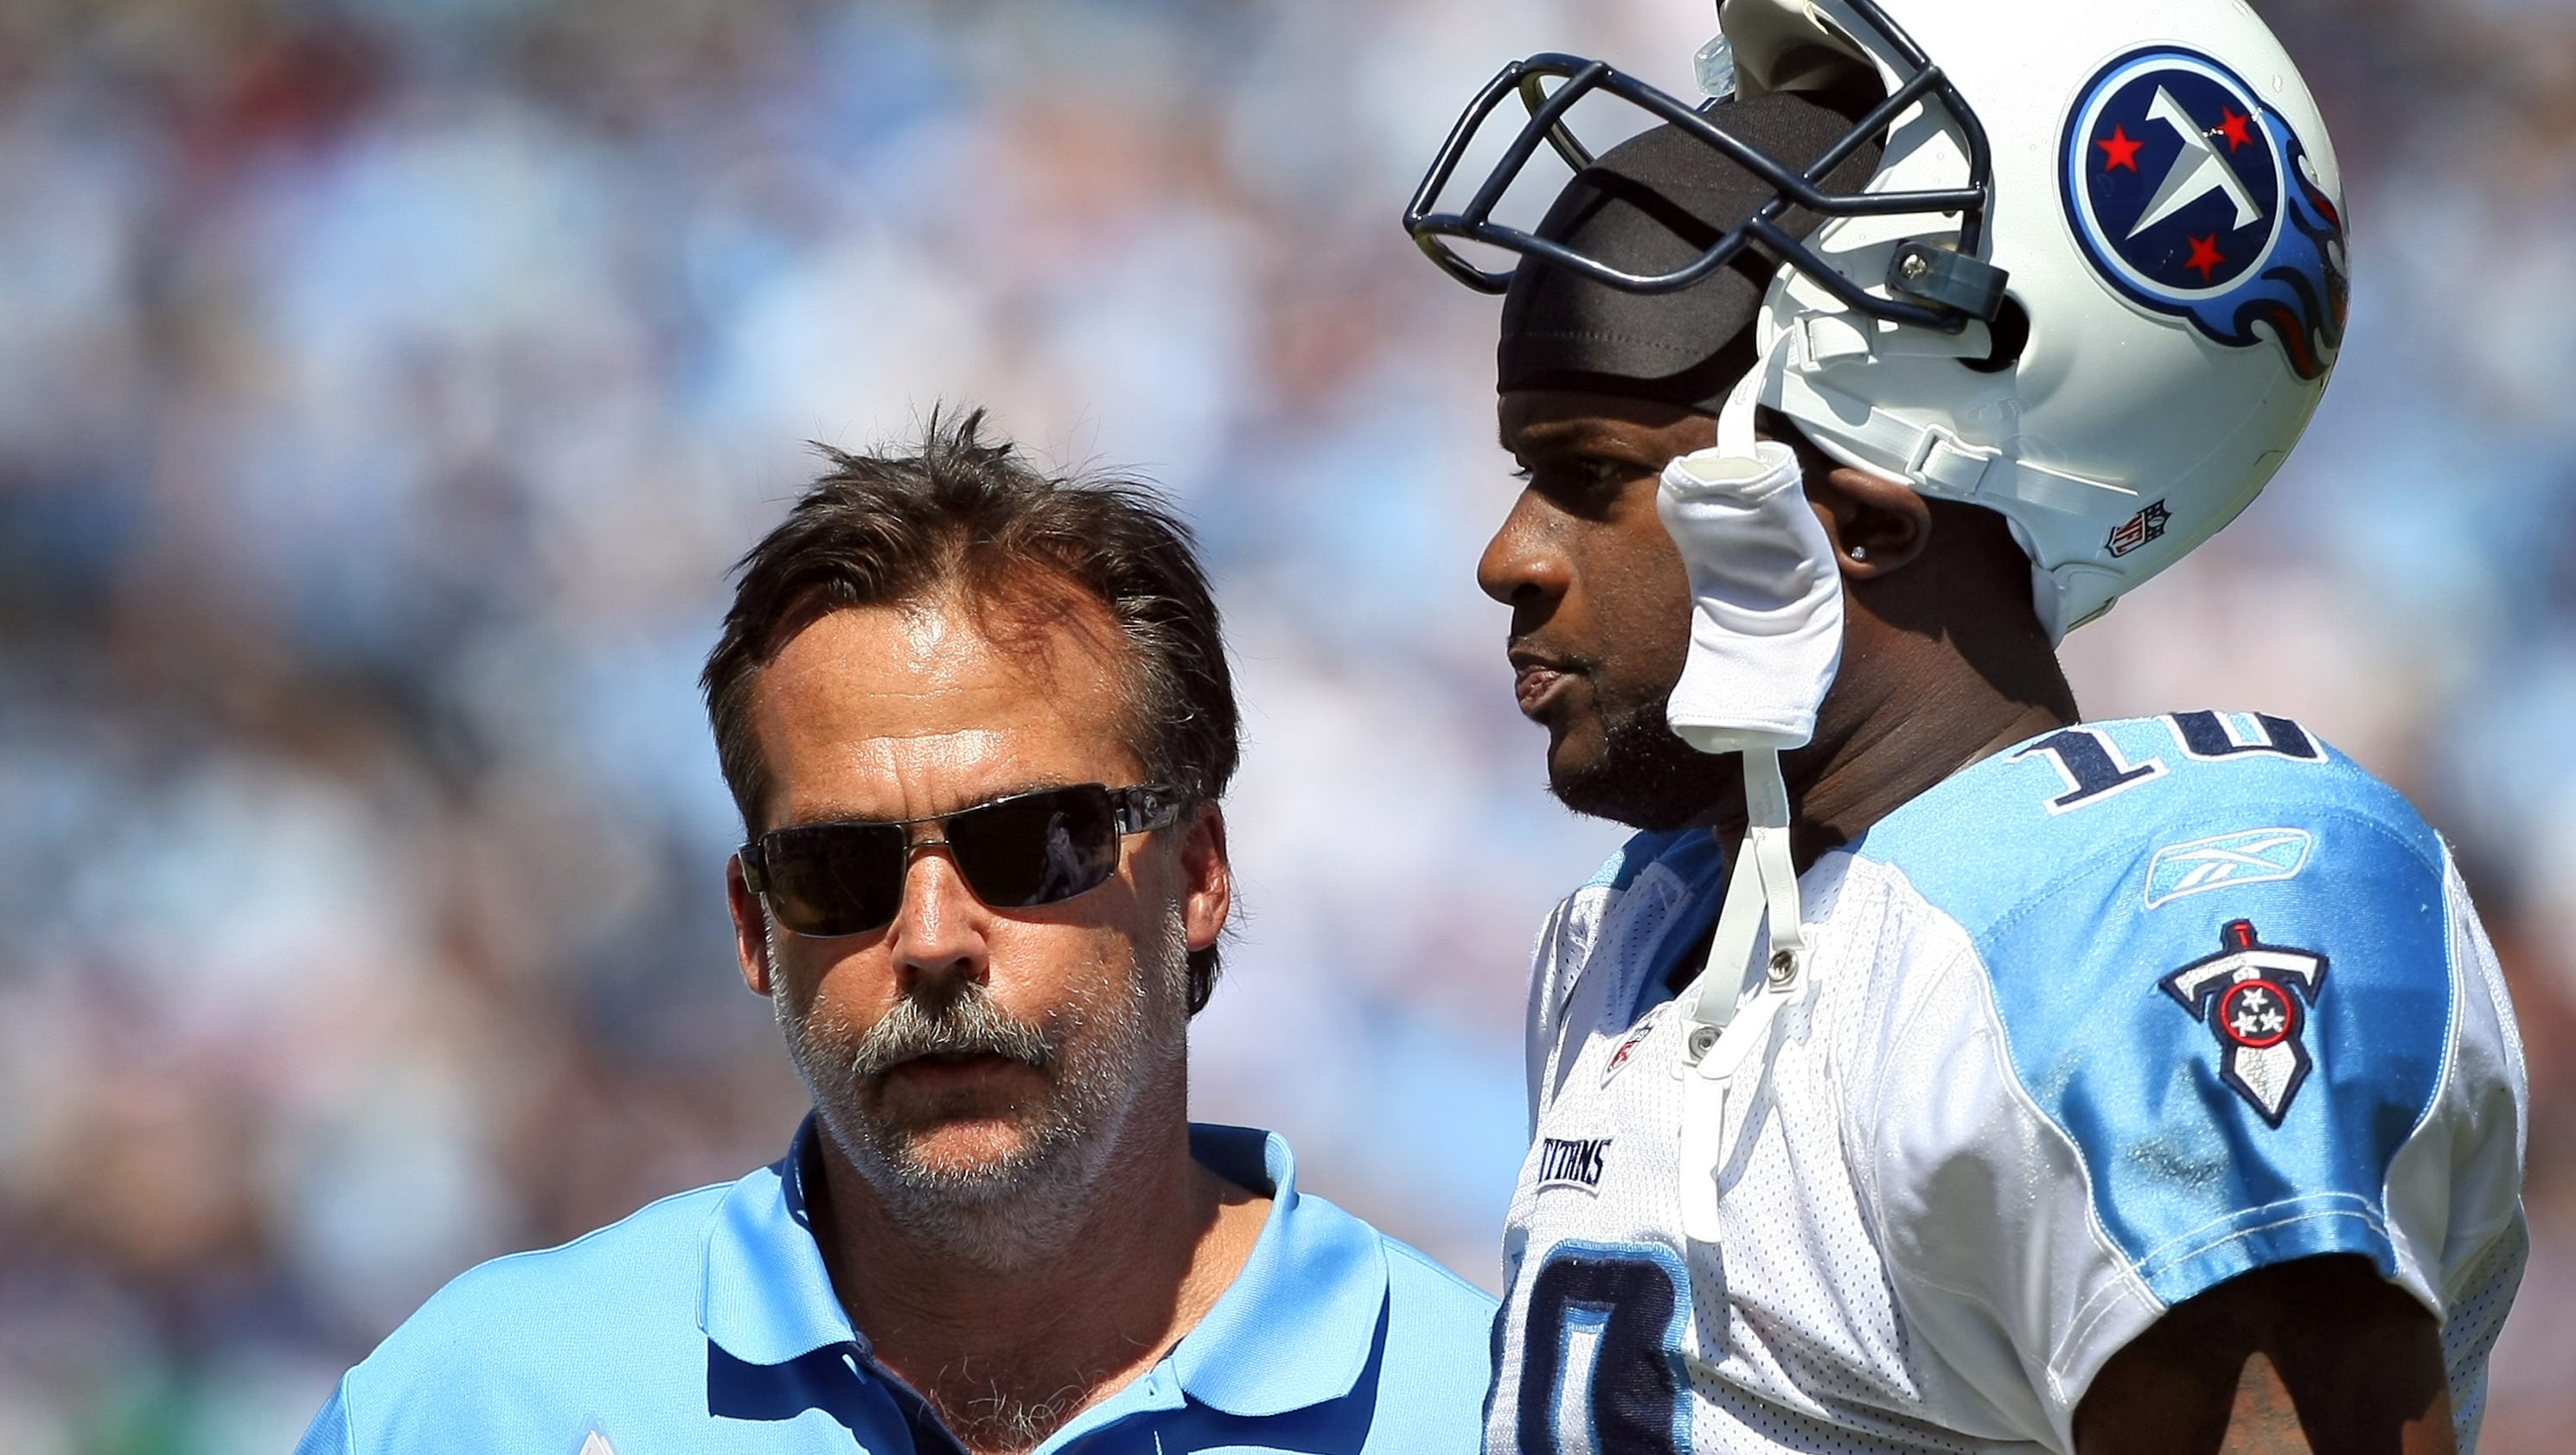 Misspelling kept Jeff Fisher from responding to Vince Young's apology